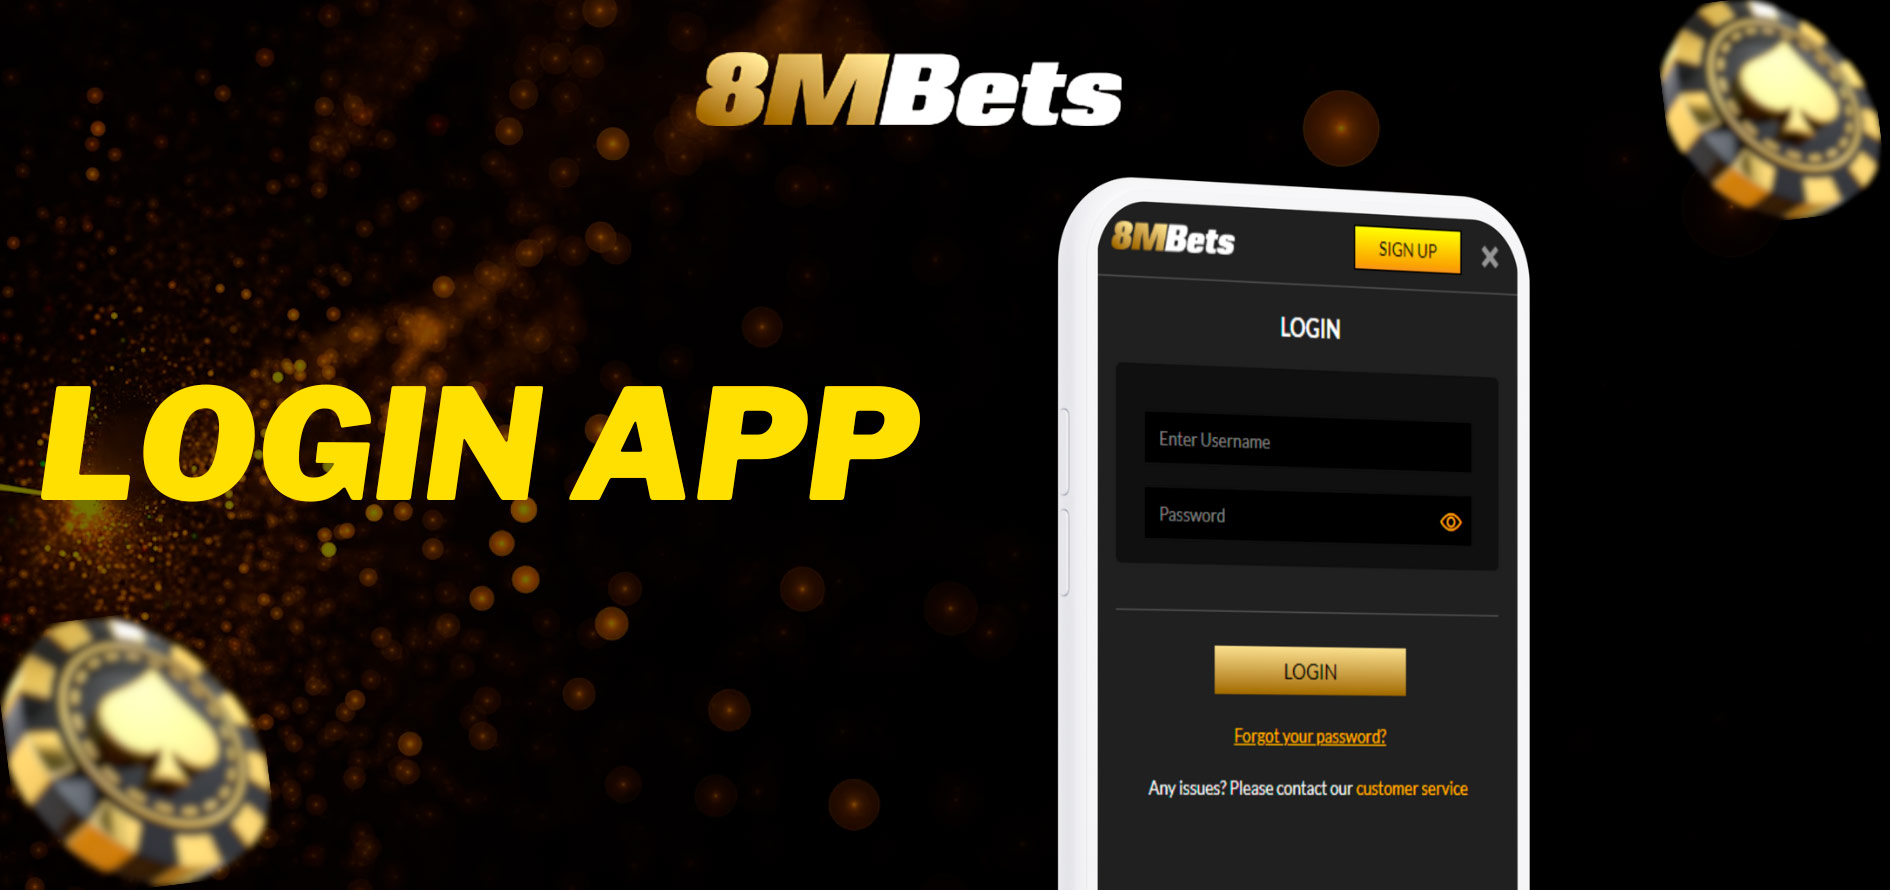 Experience the Thrill of Betting and Casino Games on 8mbets Mobile App